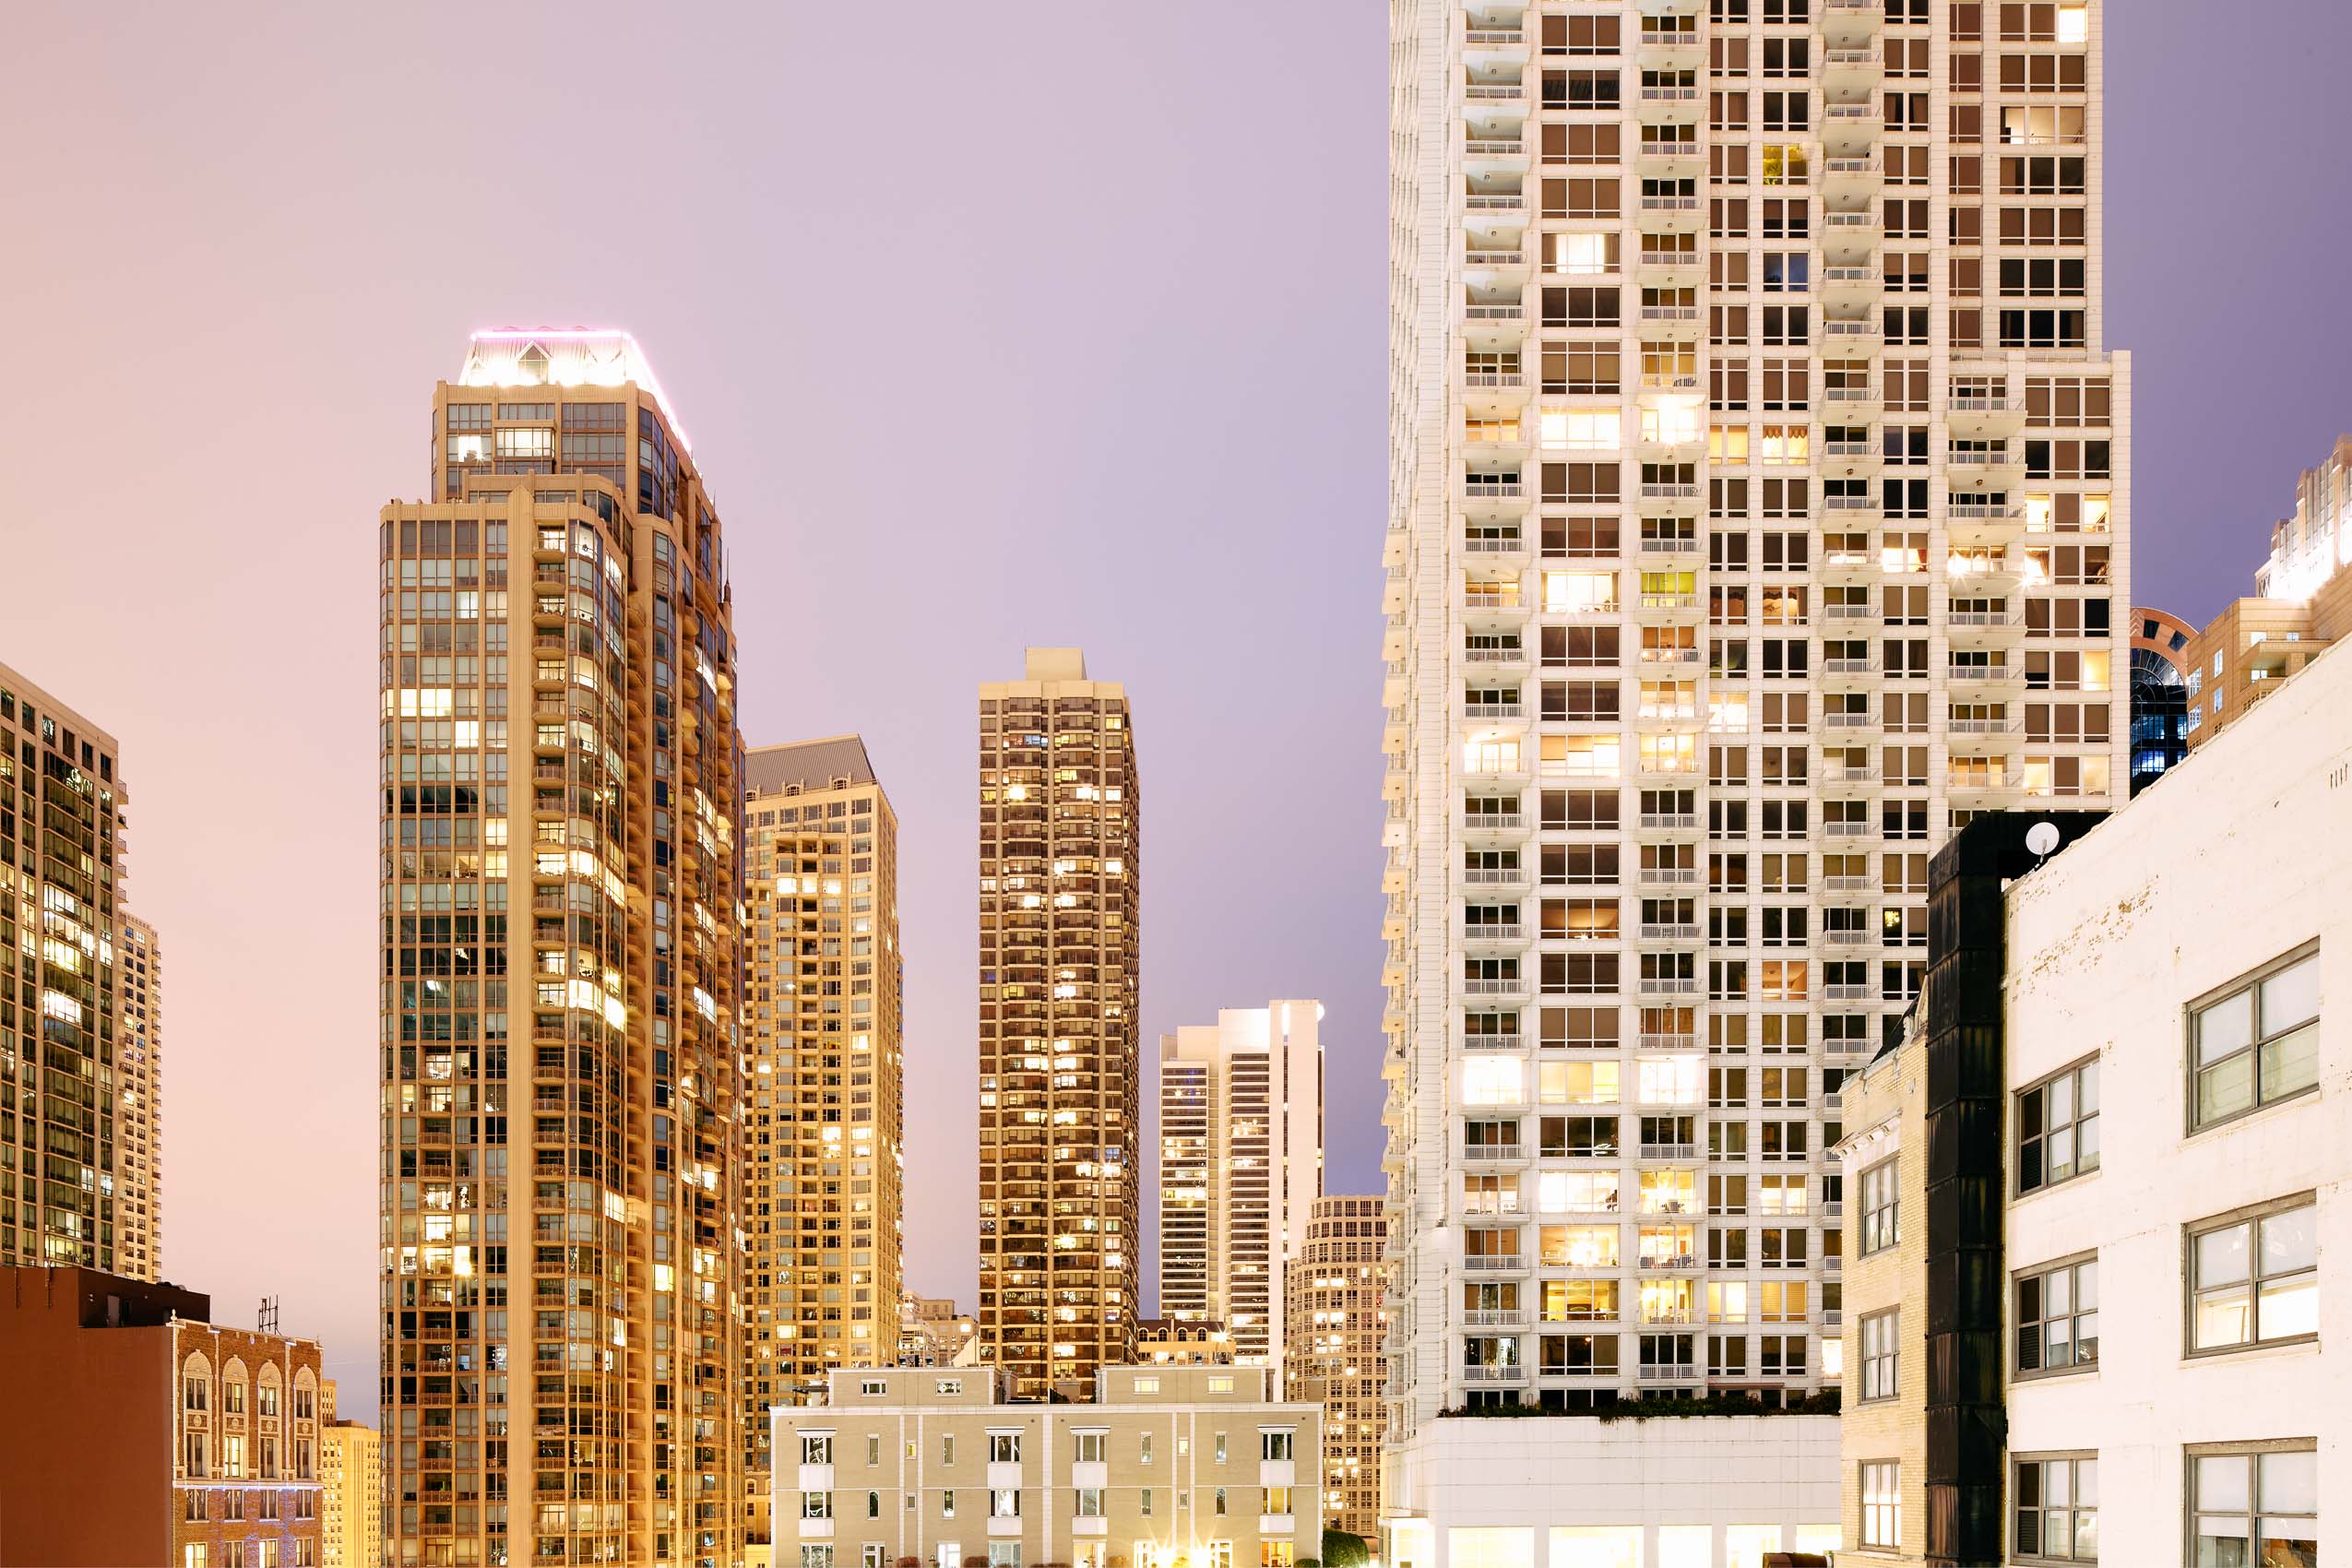 Cityscapes - Chicago | Los Angeles | Editorial and Commercial Photographer Patrick Strattner